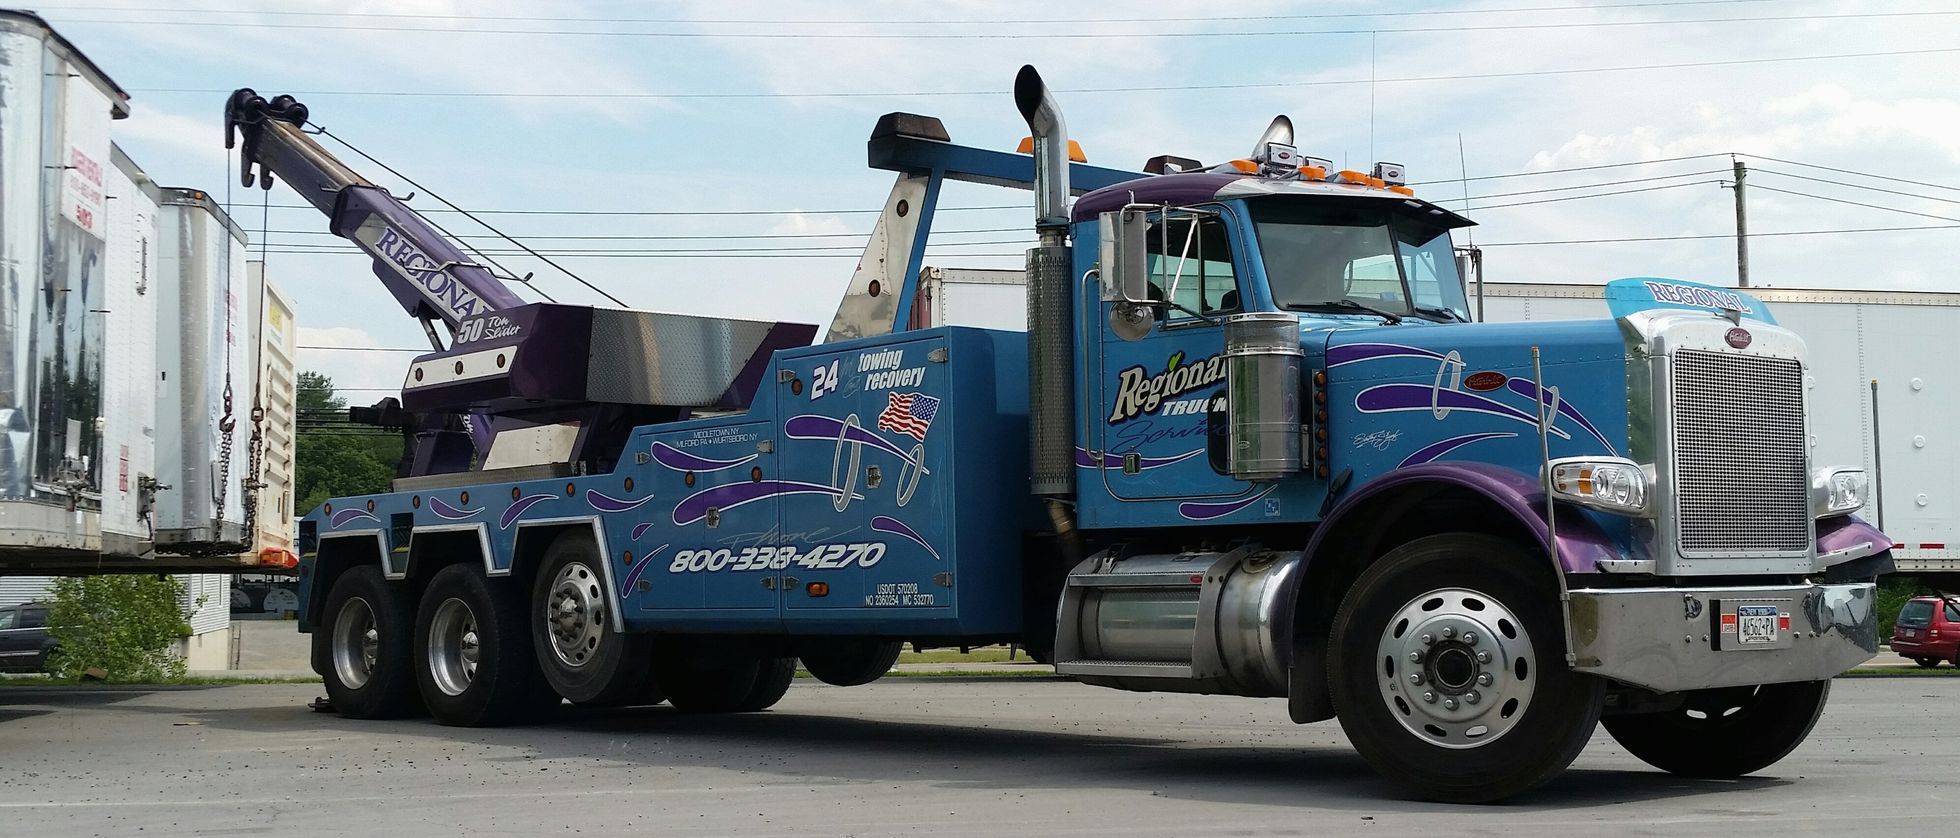 Services & Products Regional Truck Service Inc in Middletown NY